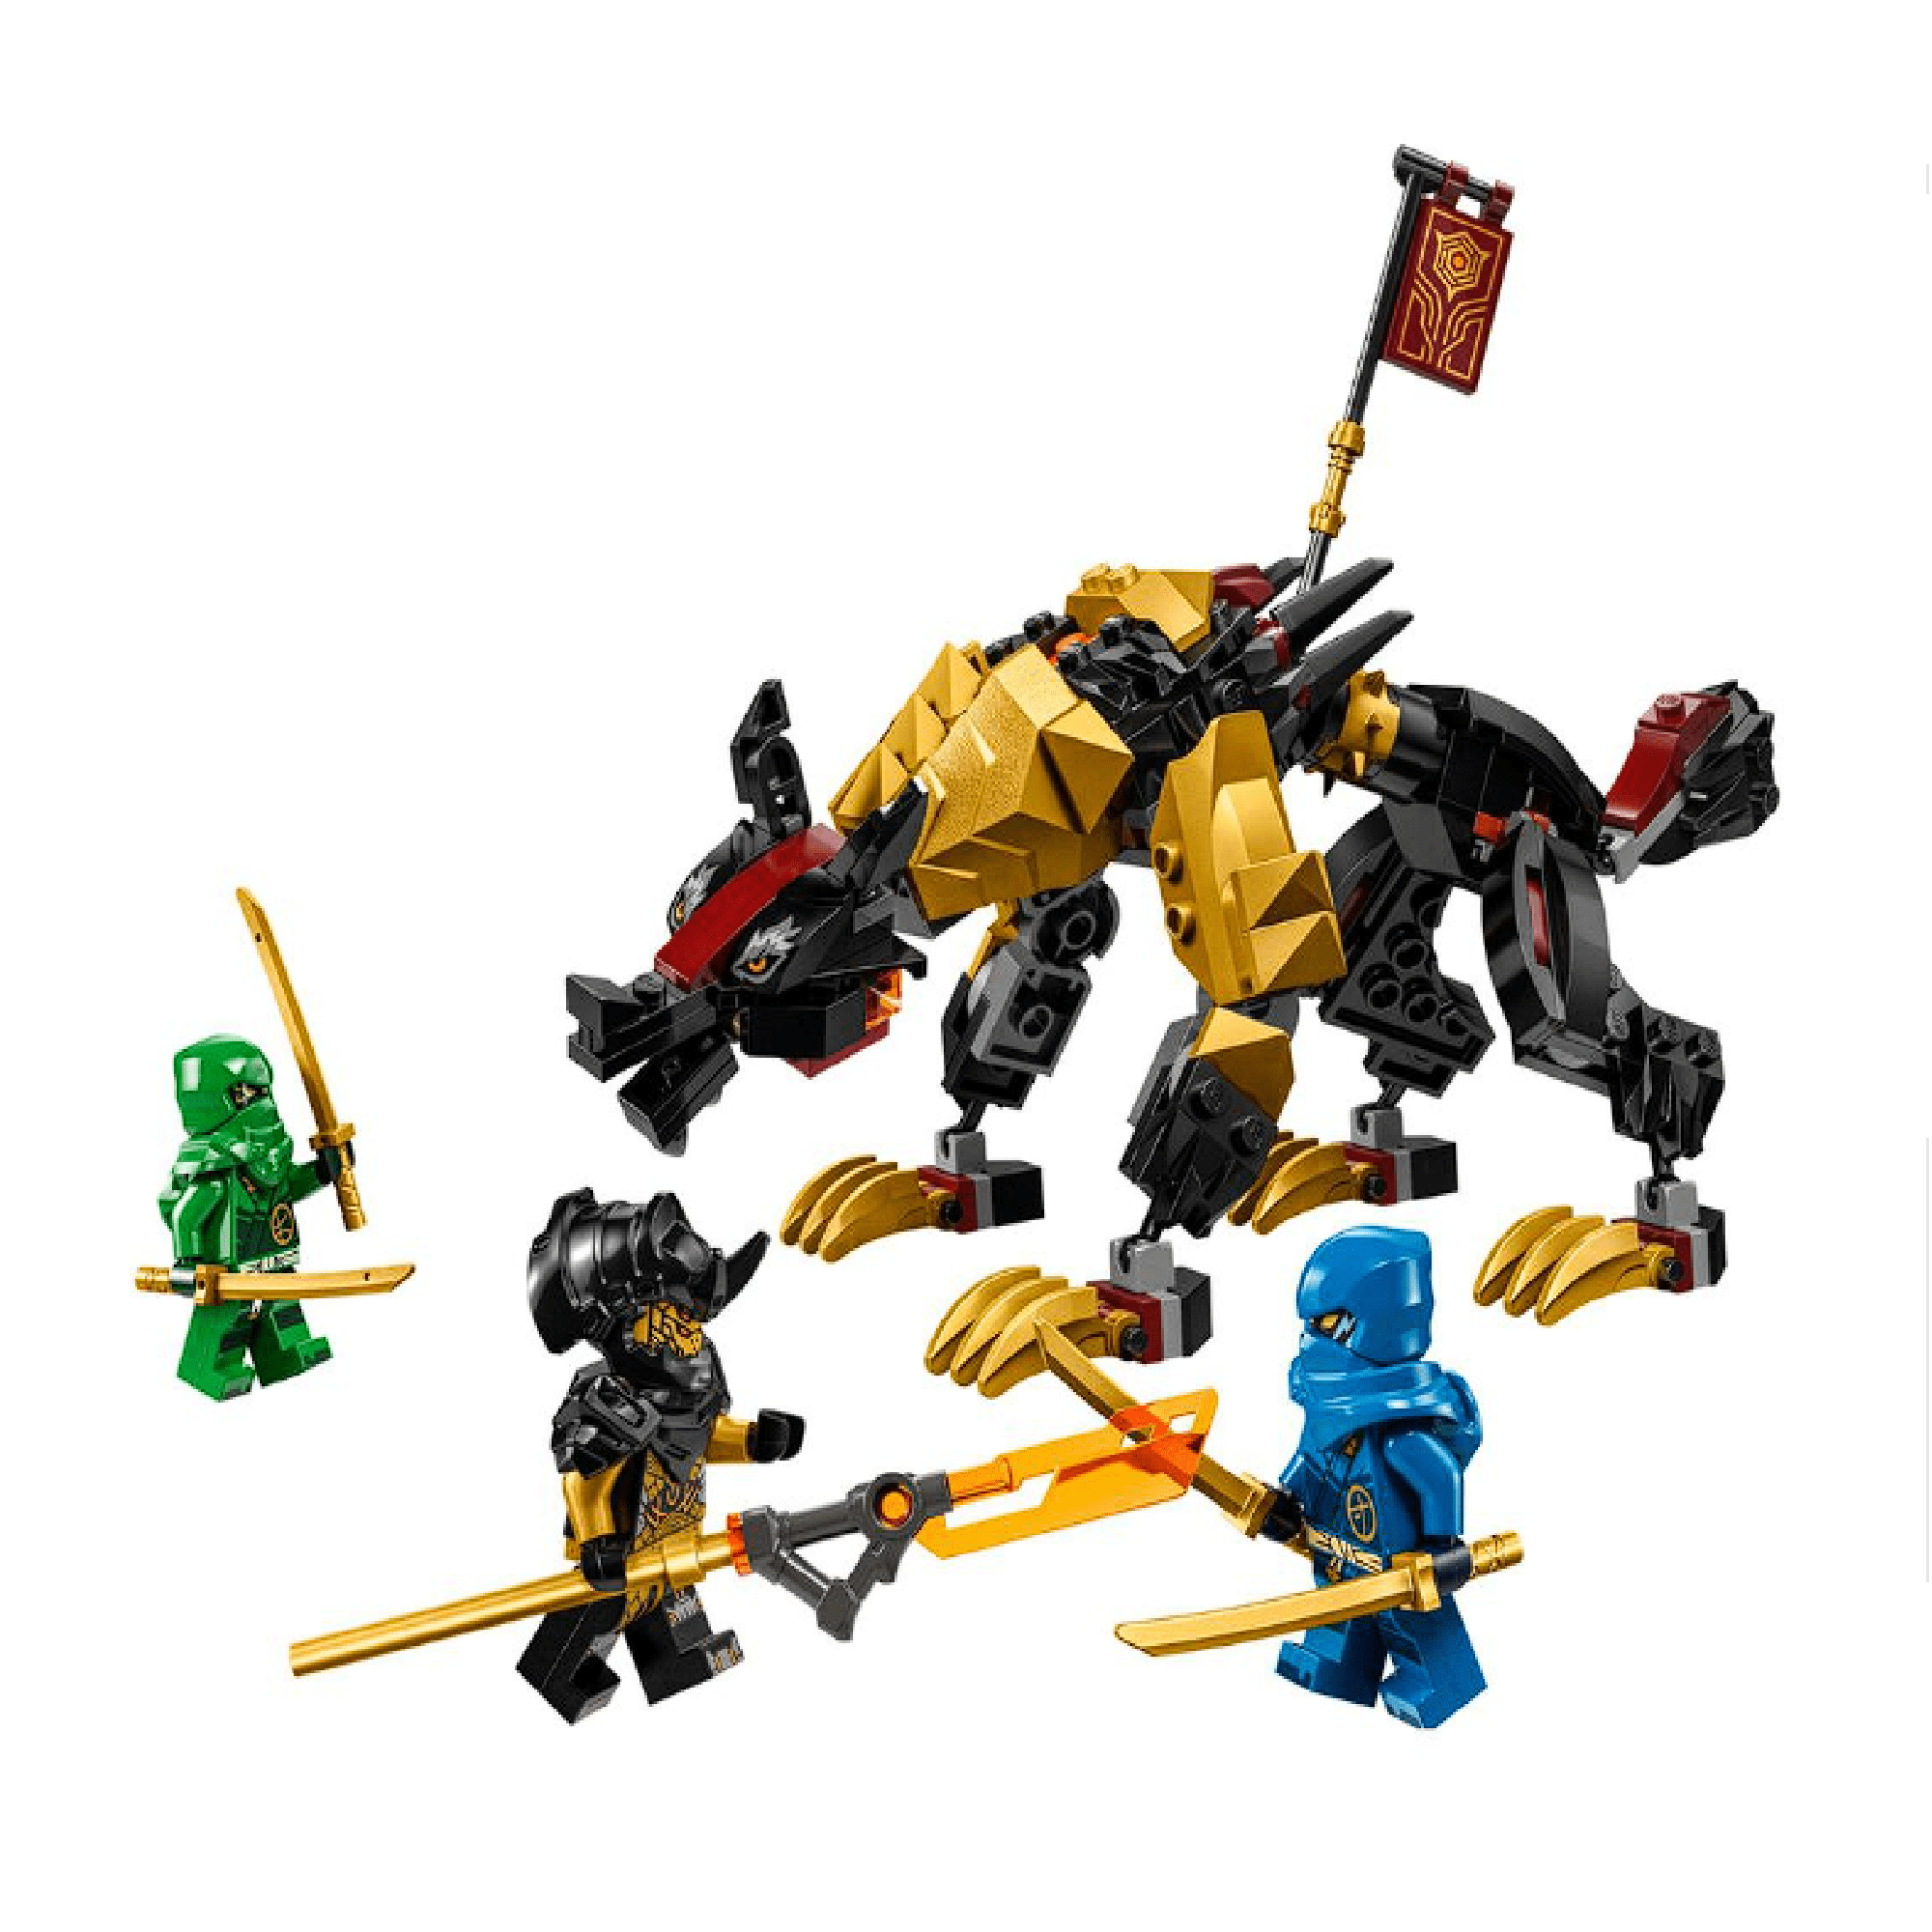 LEGO NINJAGO Imperium Dragon Hunter Hound 71790 Building Set Featuring  Monster and Dragon Toys and 3 Minifigures, Great Ninja Toys for Kids Ages  6+